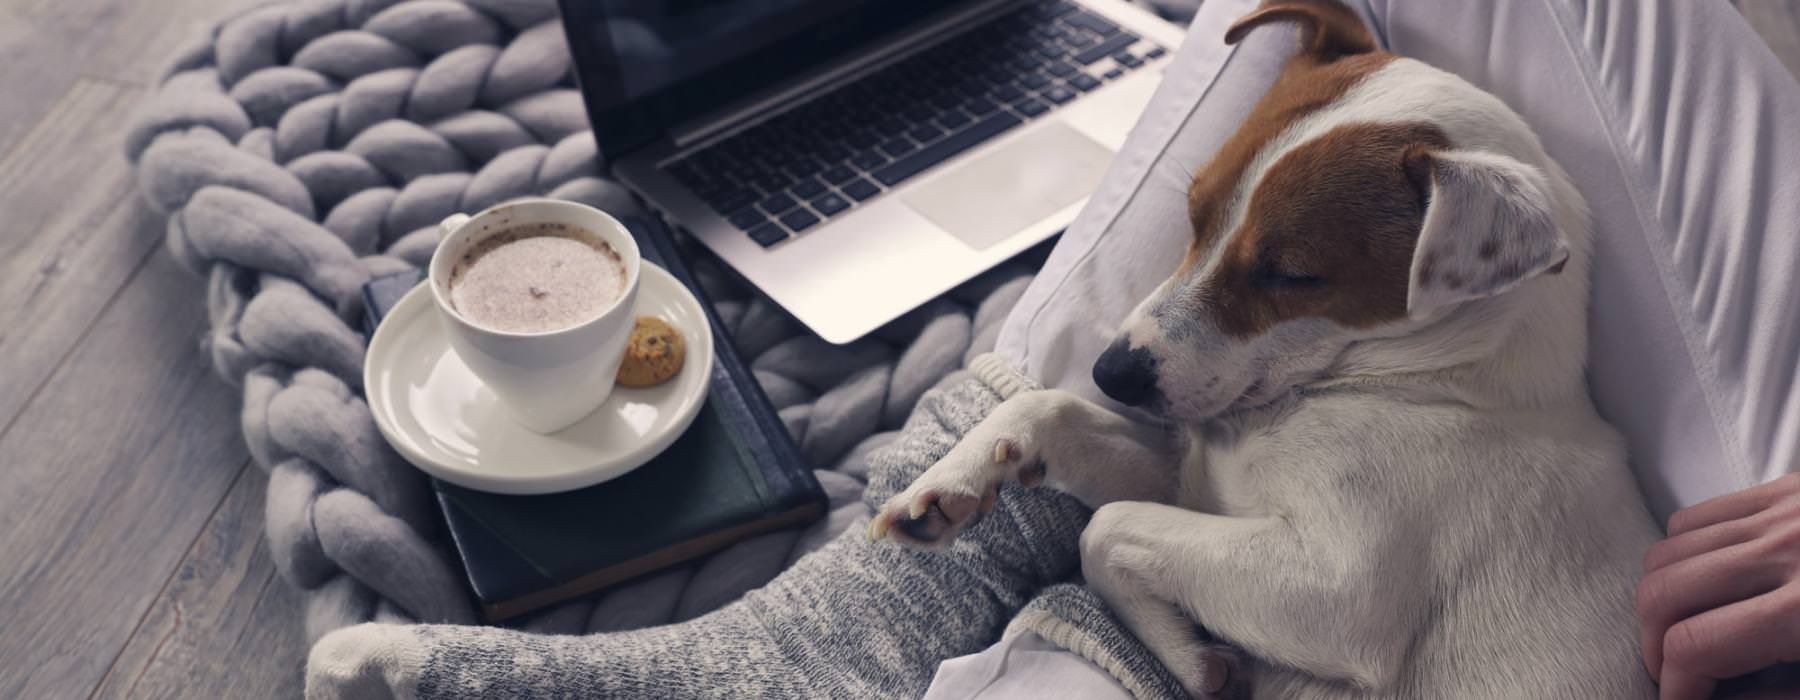 a dog lying on a blanket next to a laptop and a cup of coffee